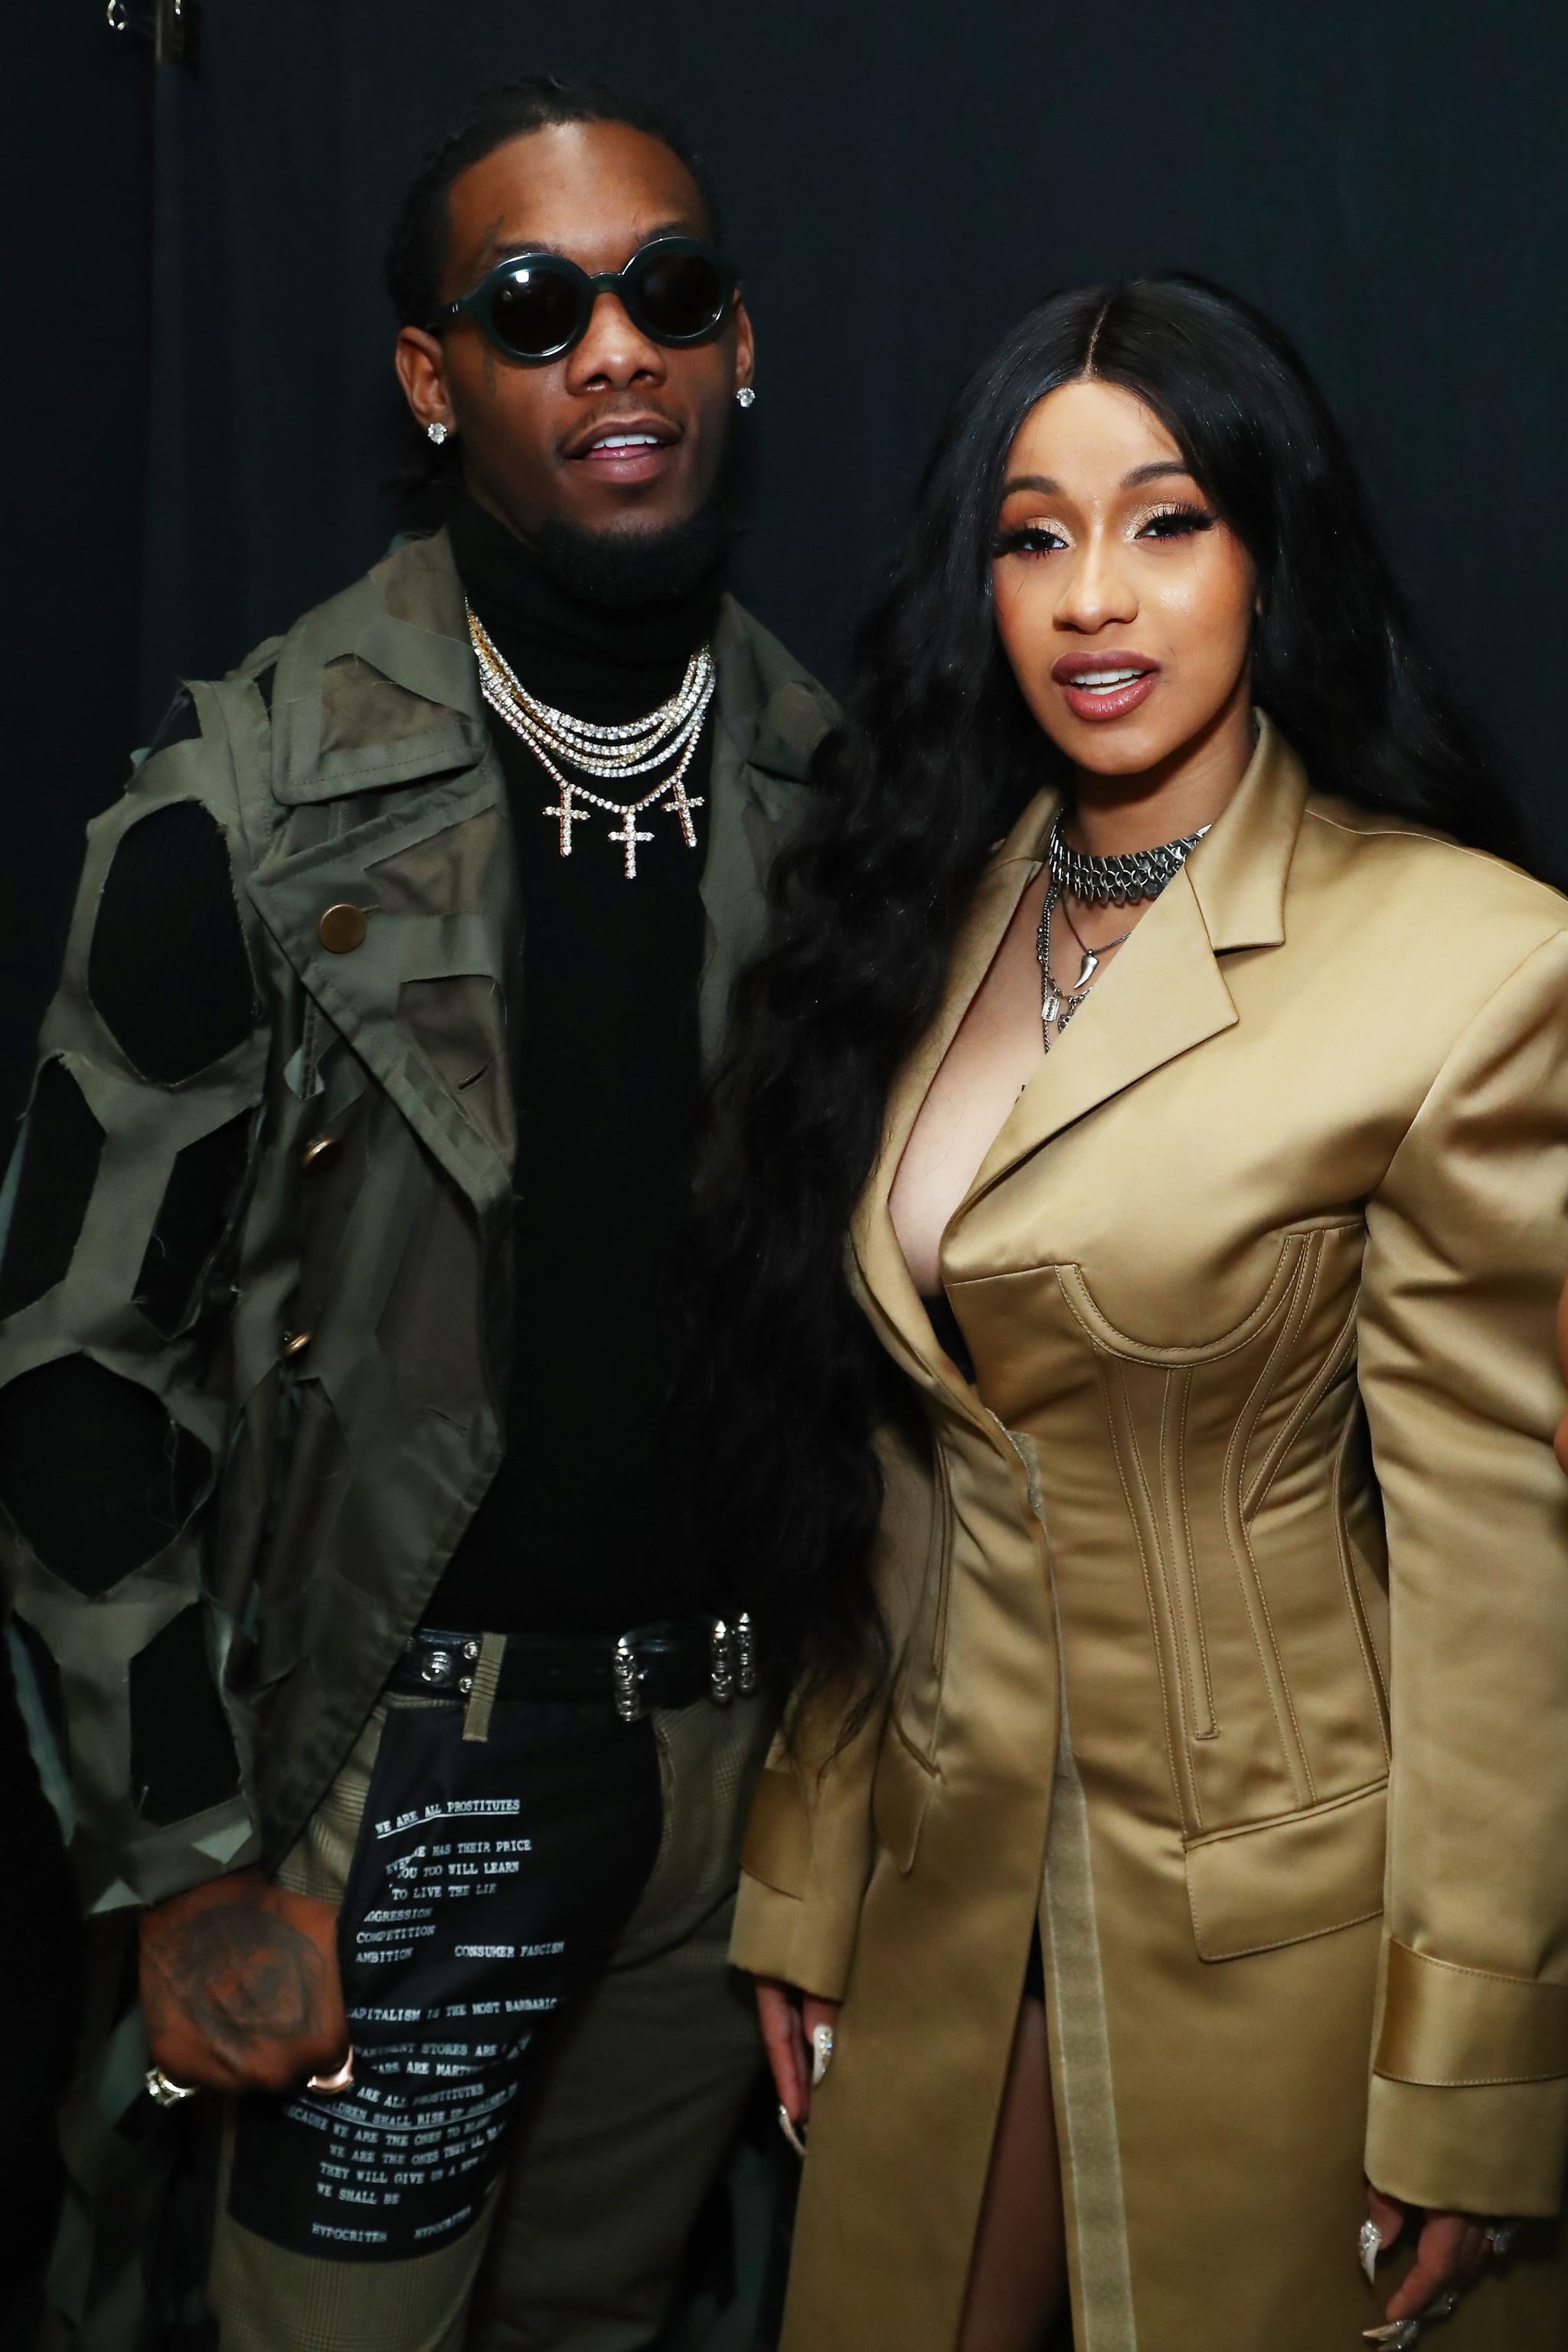 NEW YORK, NY - FEBRUARY 11:  Recording artists Offset of the group Migos and Cardi B pose backstage for Prabal Gurung during New York Fashion Week: The Shows at Gallery I at Spring Studios on February 11, 2018 in New York City.  (Photo by Astrid Stawiarz/Getty Images for New York Fashion Week: The Shows)